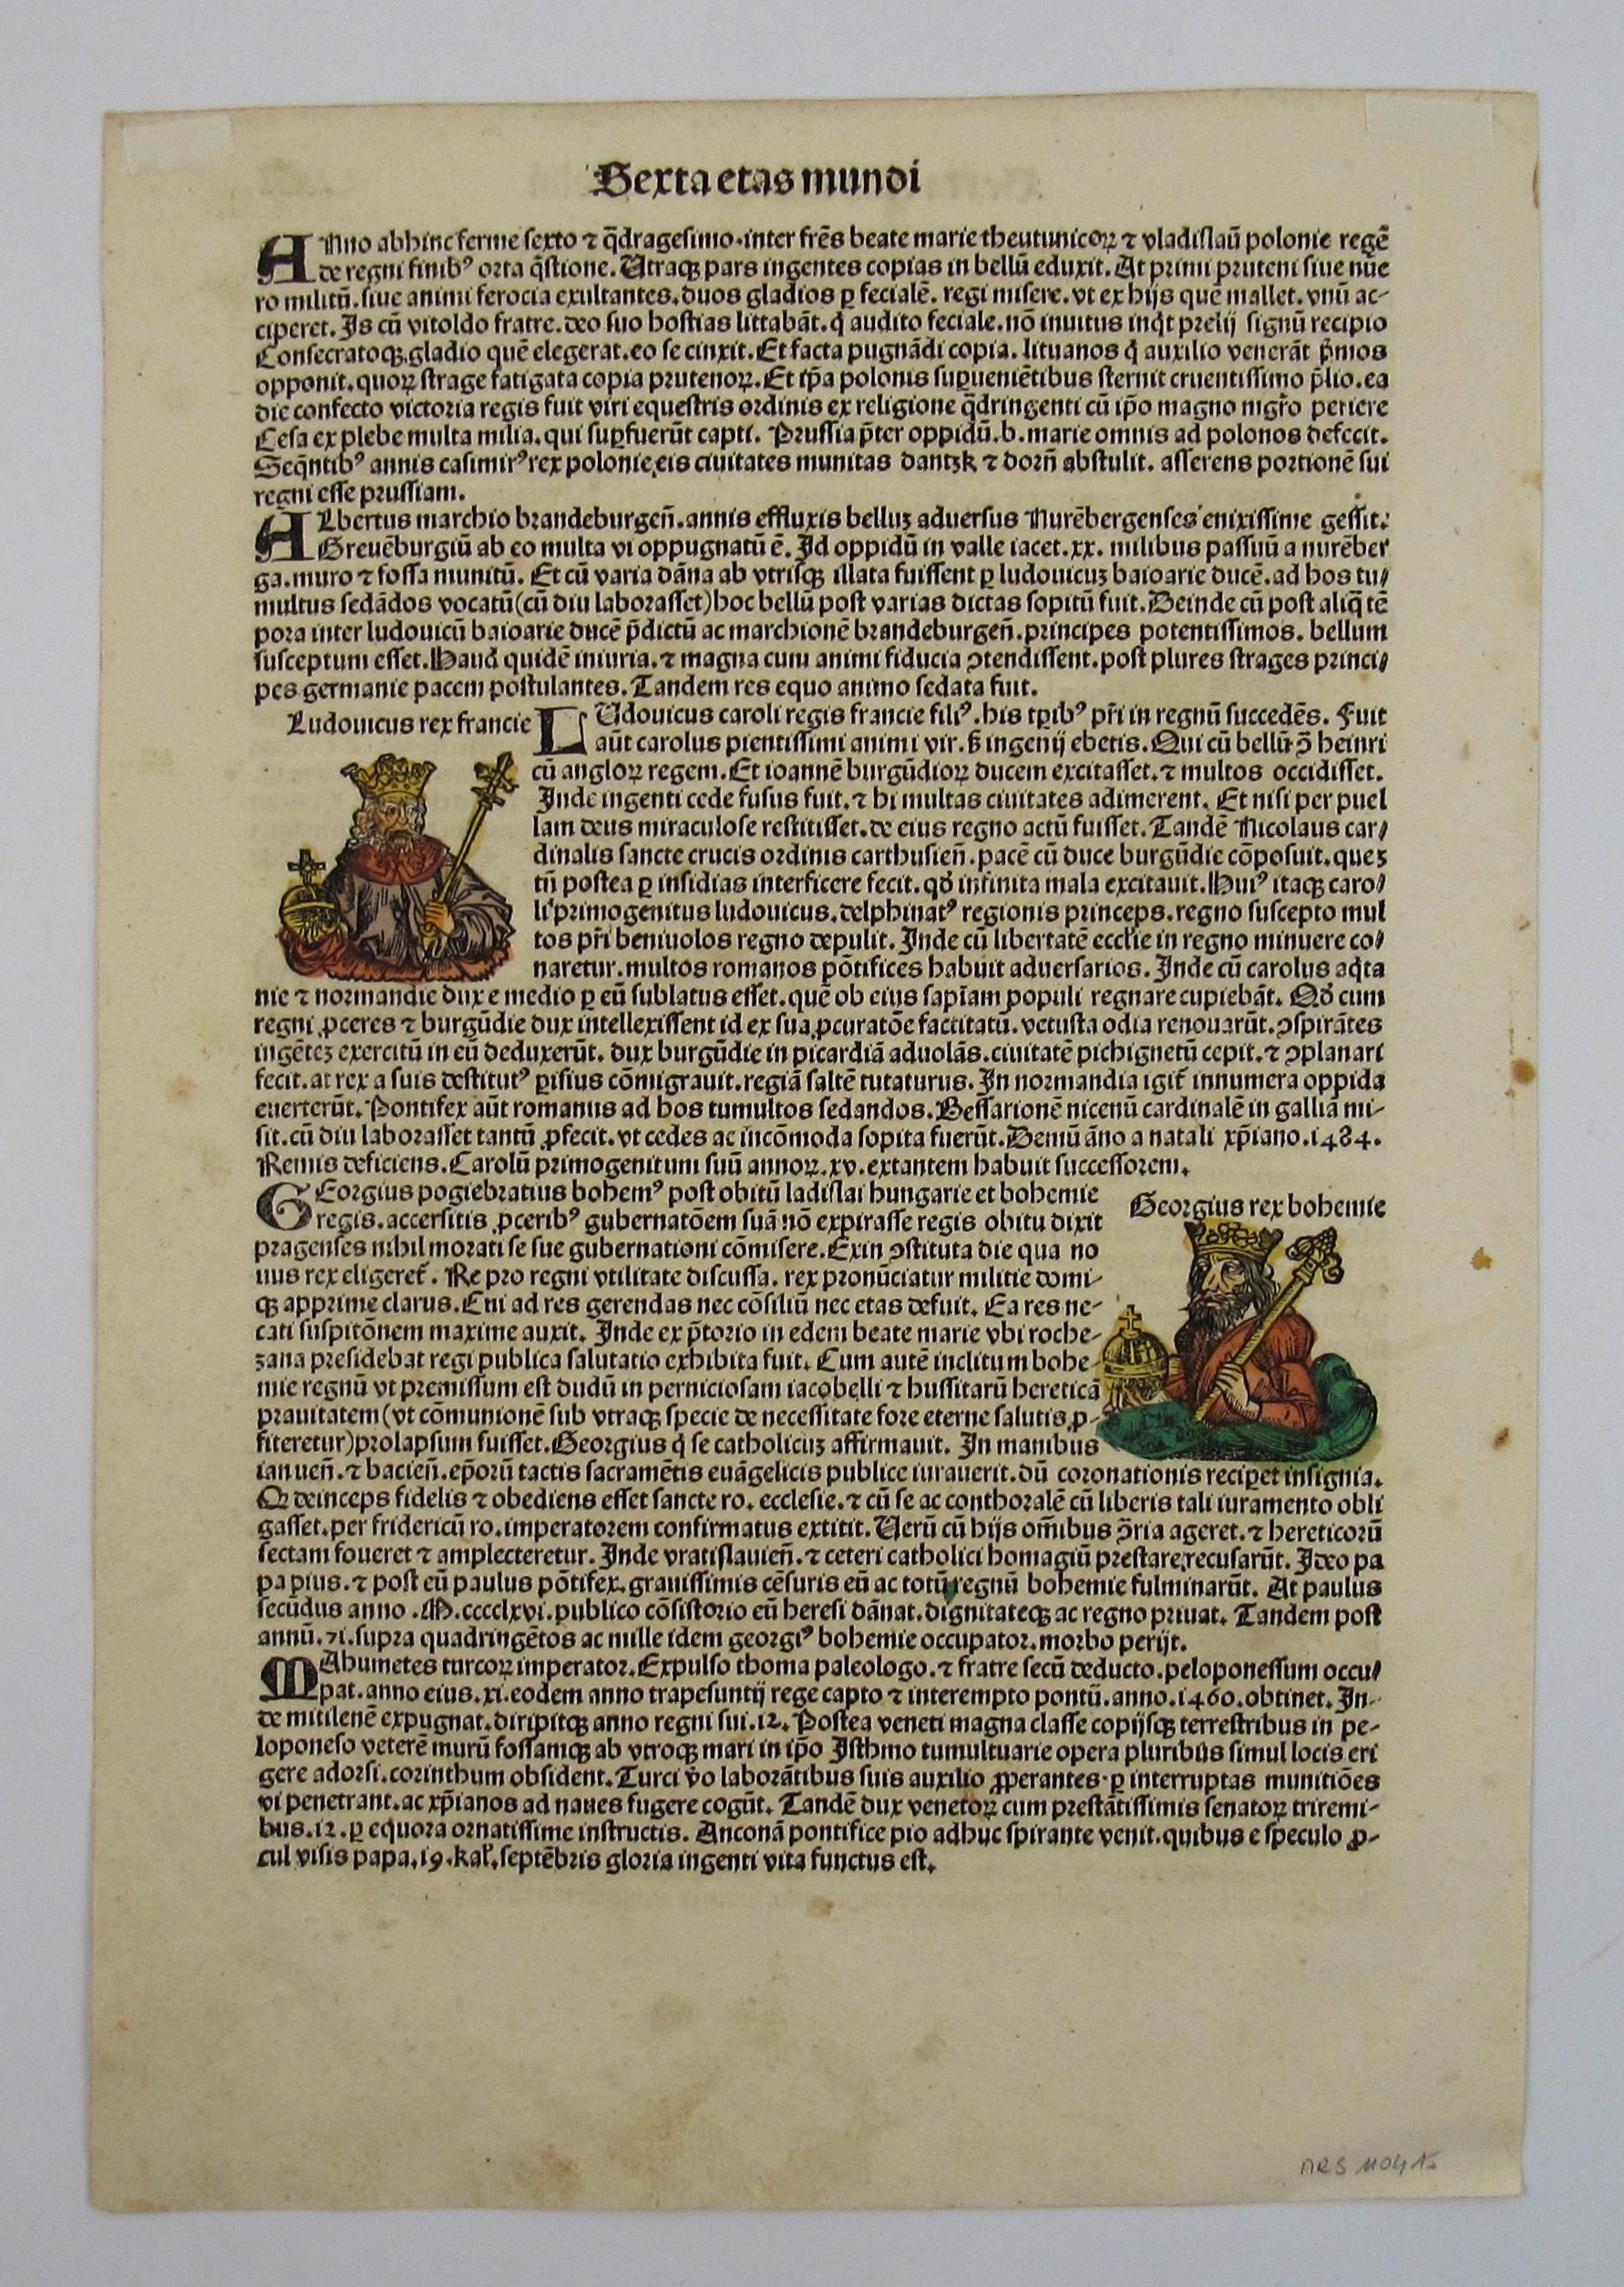 Collection of Ten Medieval Woodblock Prints from the 'Nuremberg Chronicle'  - Brown Figurative Print by Hartmann Schedel